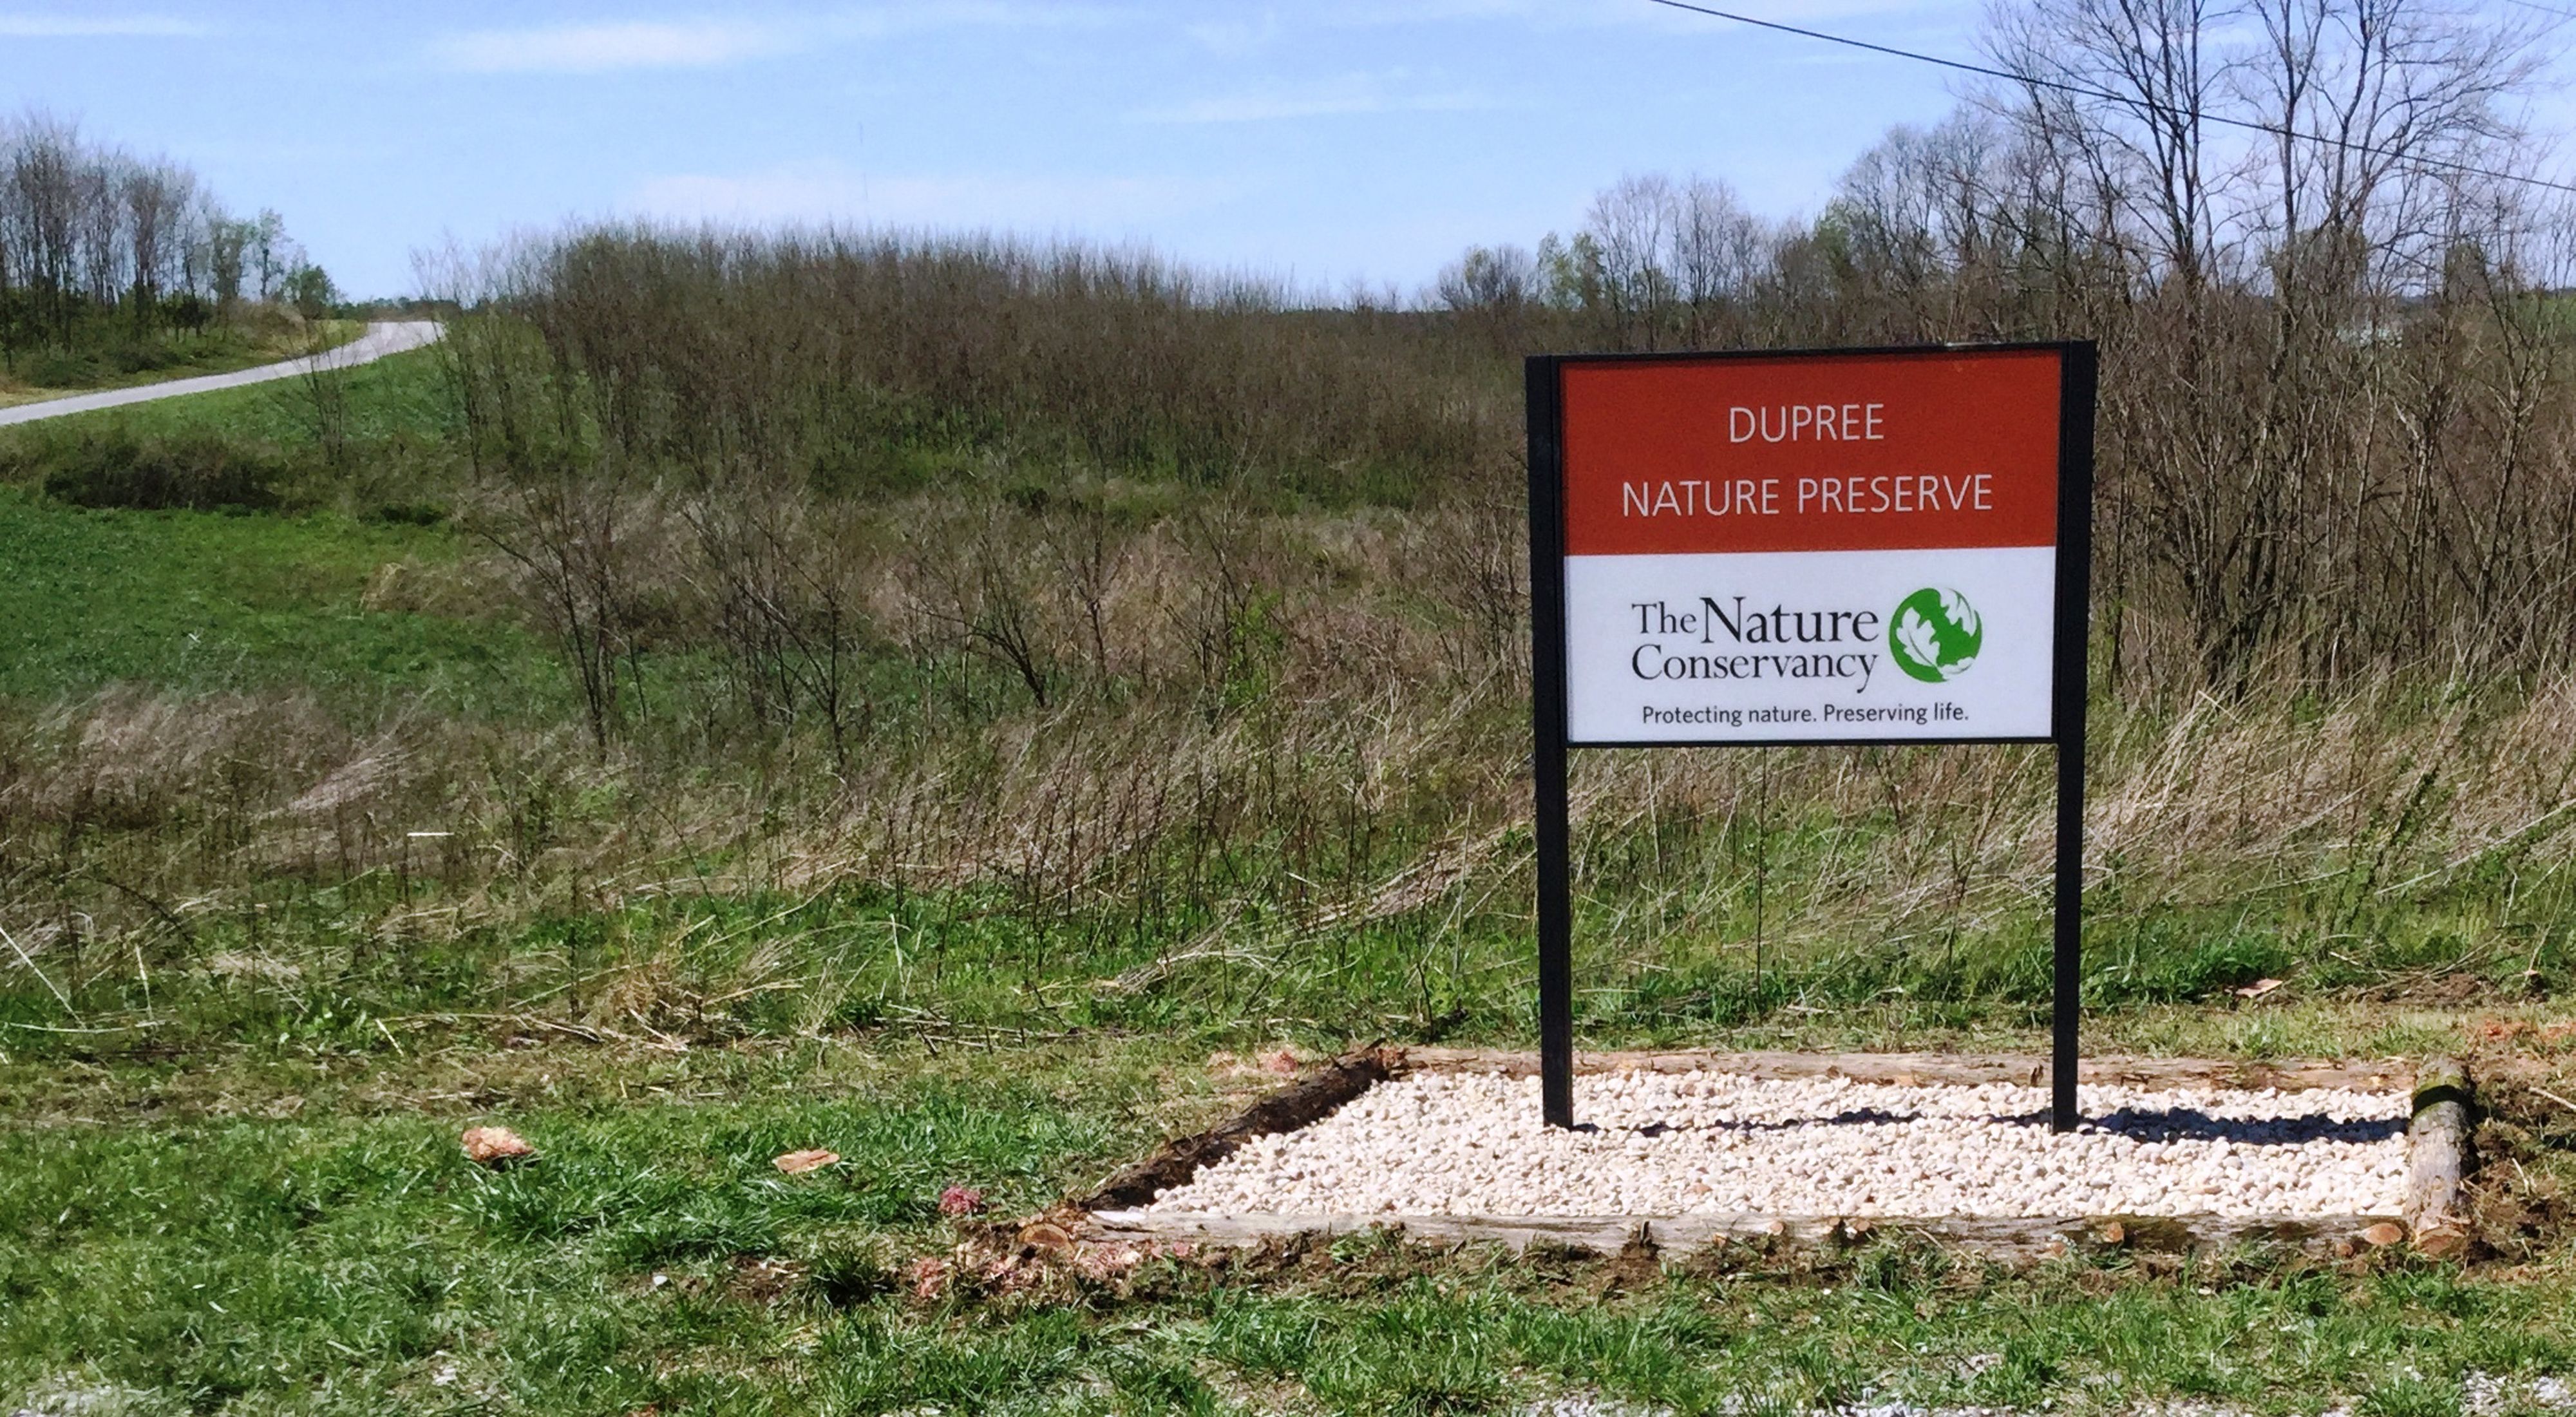 A brown and white sign marks a Dupree Nature Preserve.